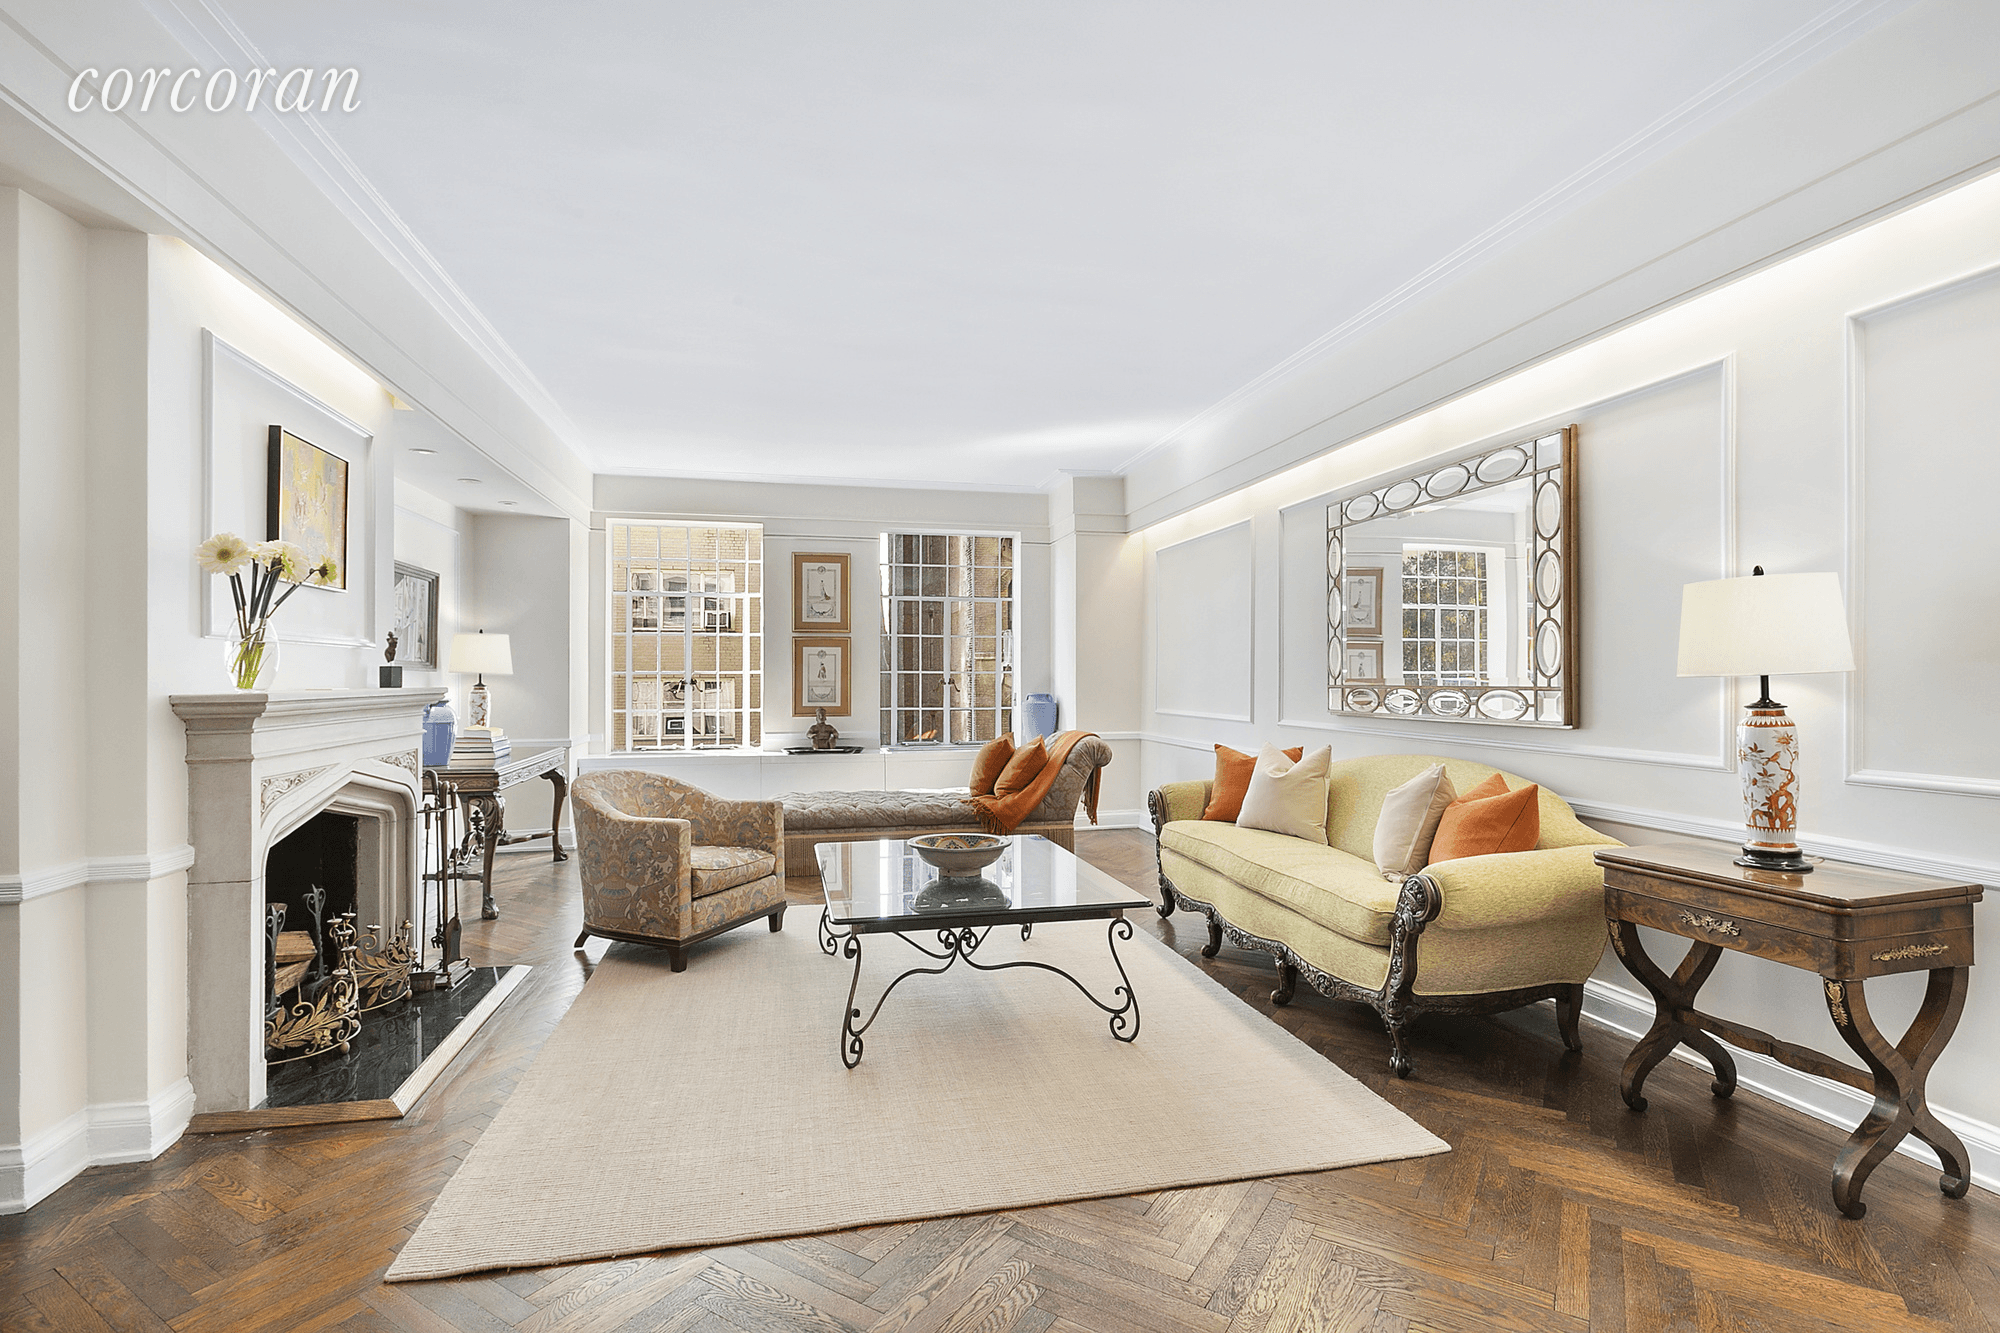 Bright and sunny three bedroom, three bathroom home on the Upper West Side.